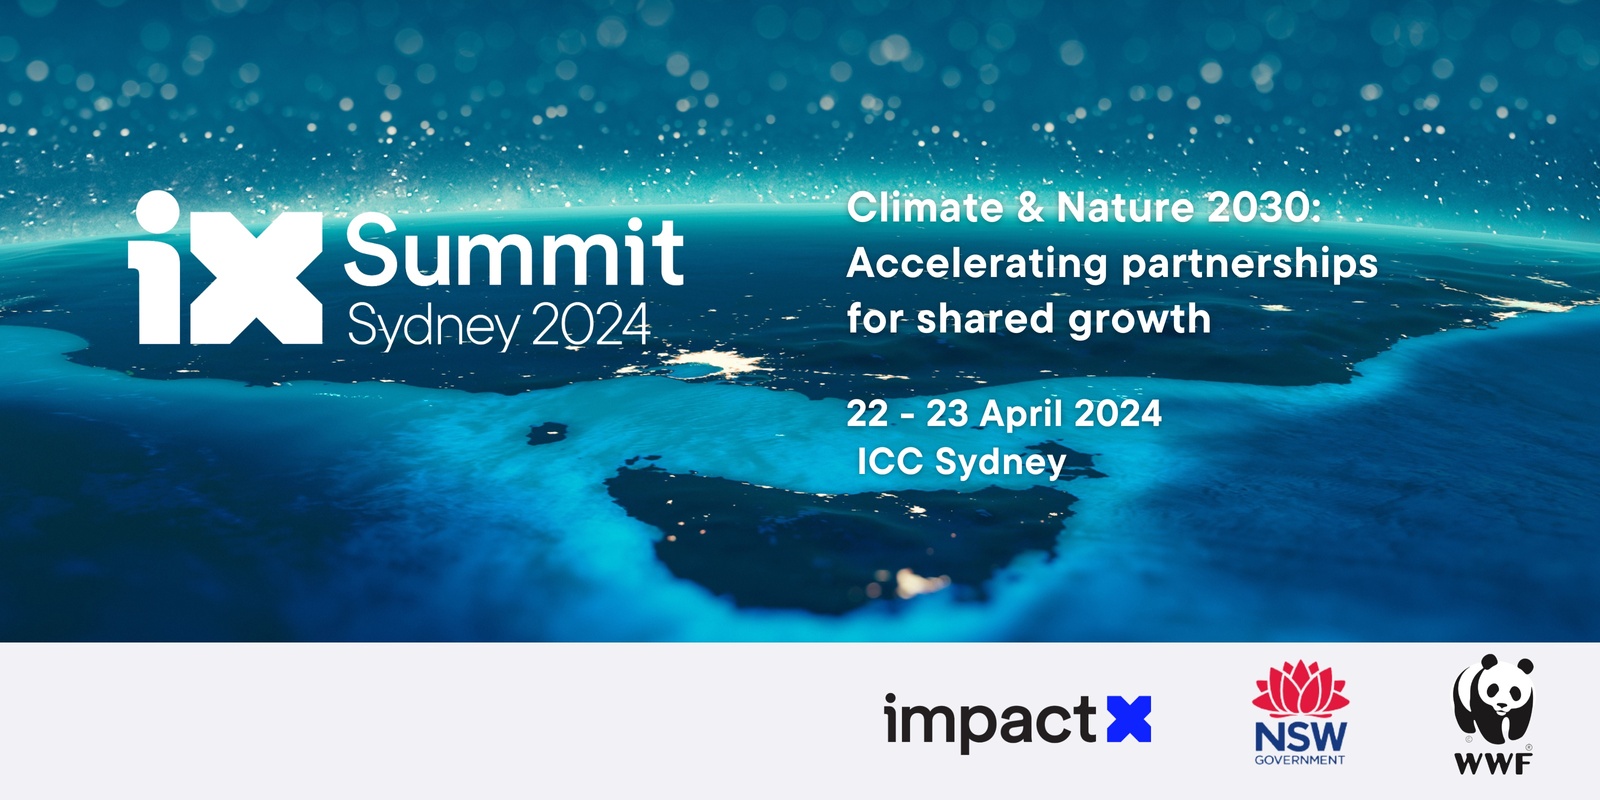 Banner image for iX Summit Sydney 2024 - Climate & Nature 2030: Accelerating Partnerships for Shared Growth 